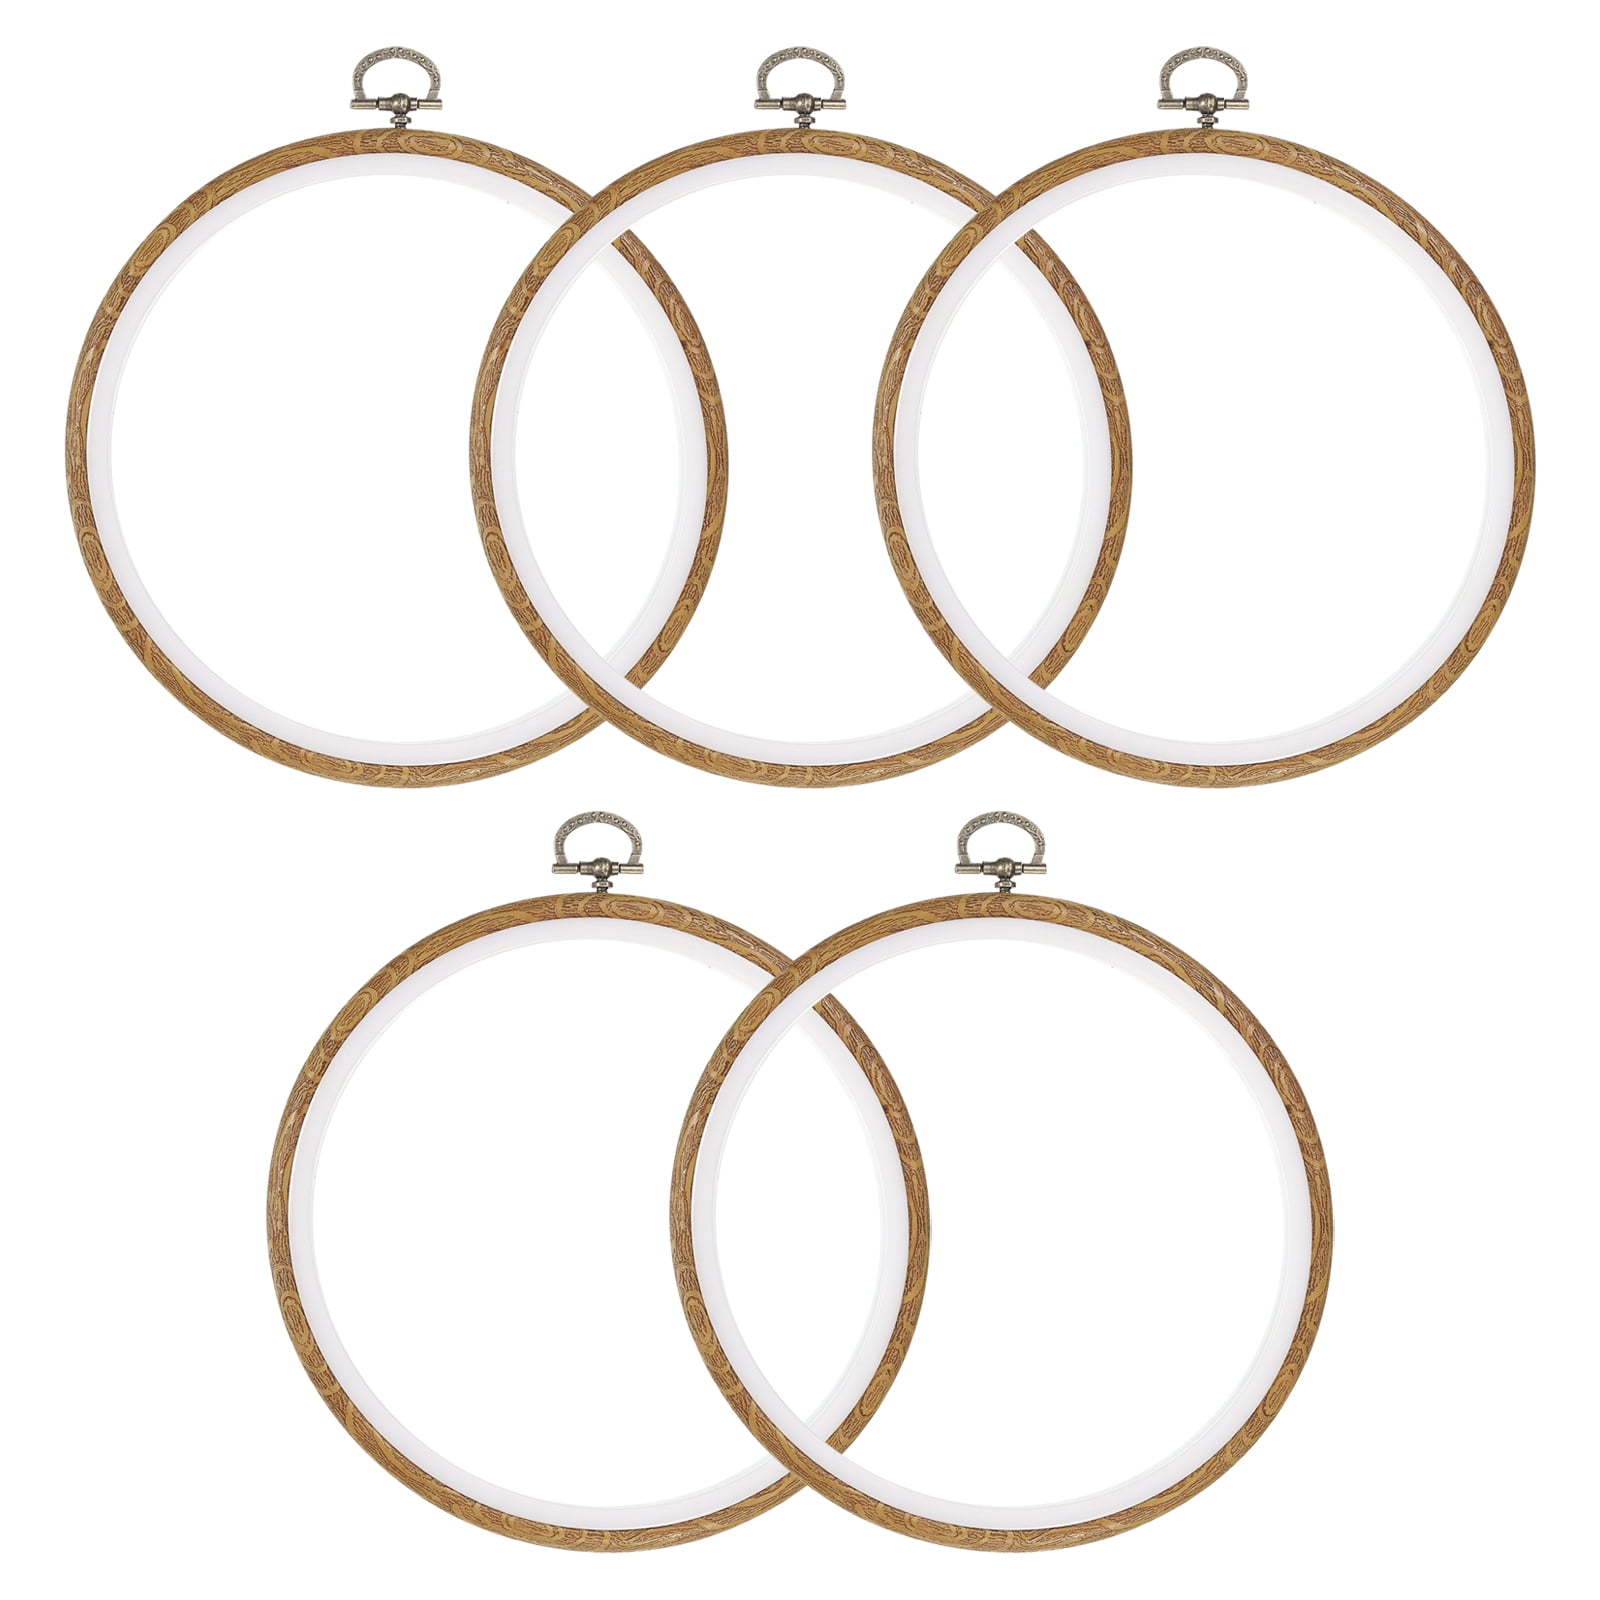 6 inch Round Wooden Embroidery Hoops Bulk Wholesale 3 Pieces Darice 39013 